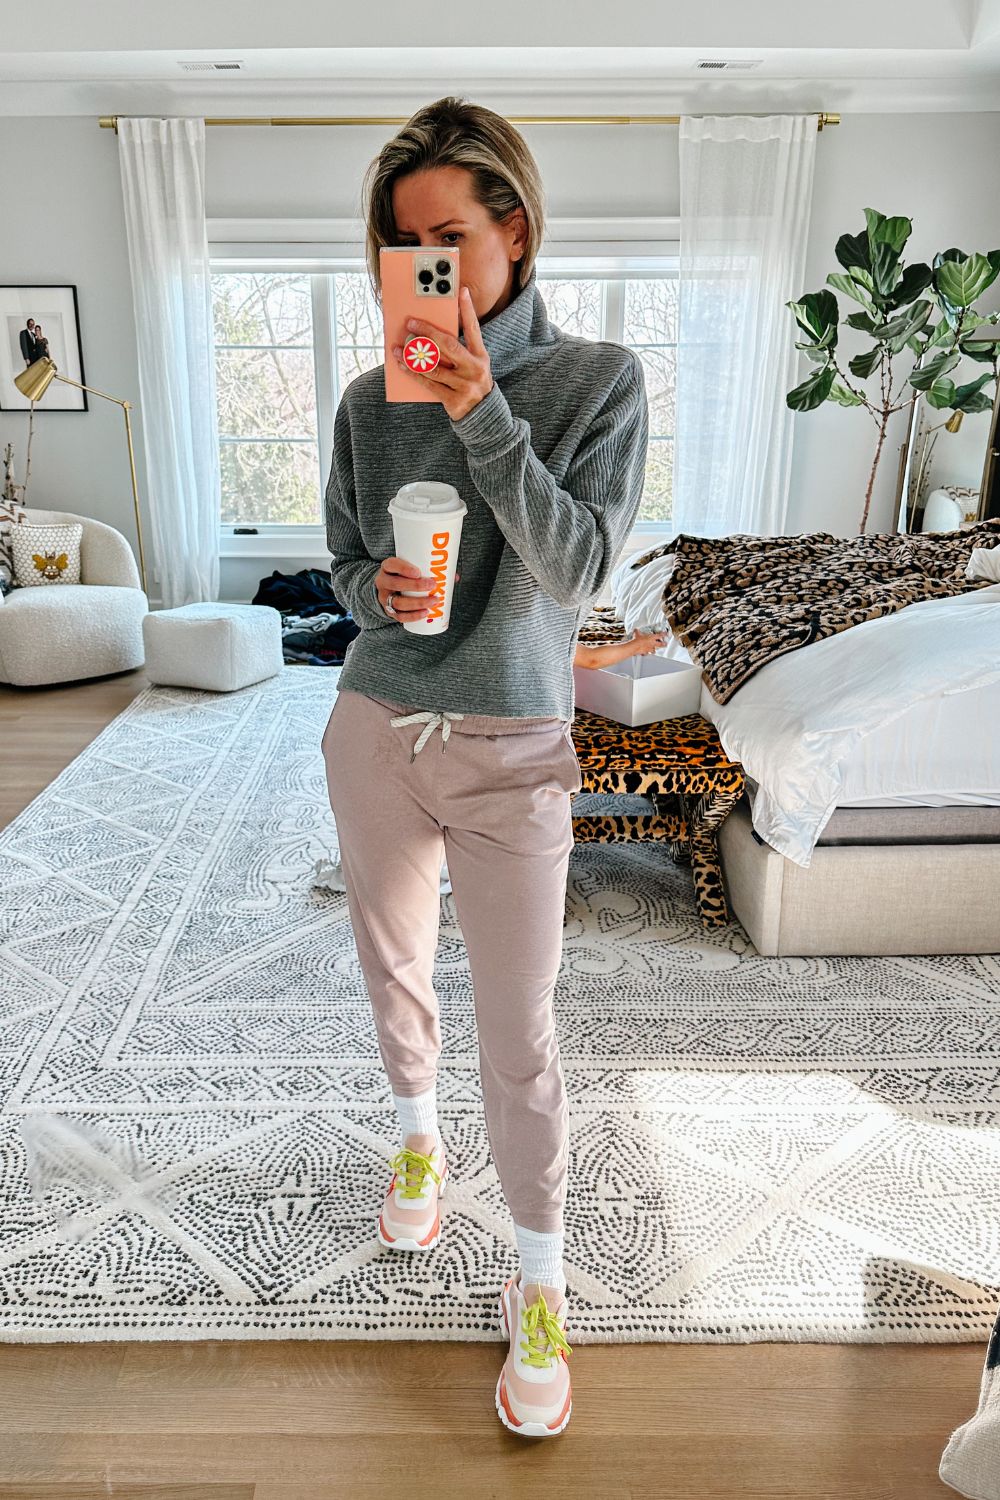 Suzanne wearing a grey pullover and joggers